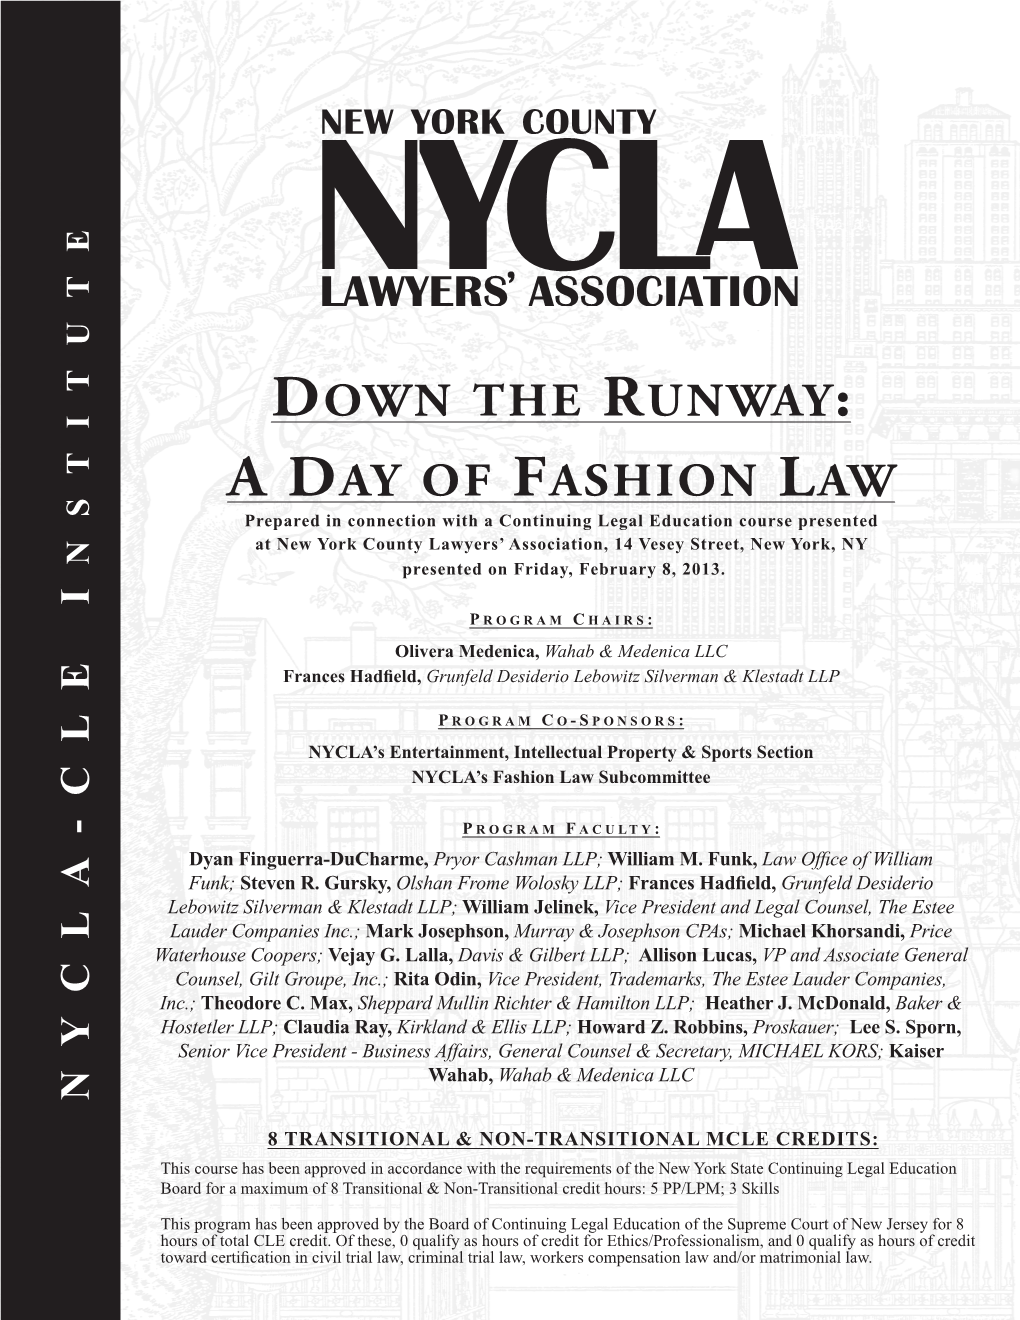 A Day of Fashion Law Friday, February 8, 2013 9:00 AM to 4:45 PM